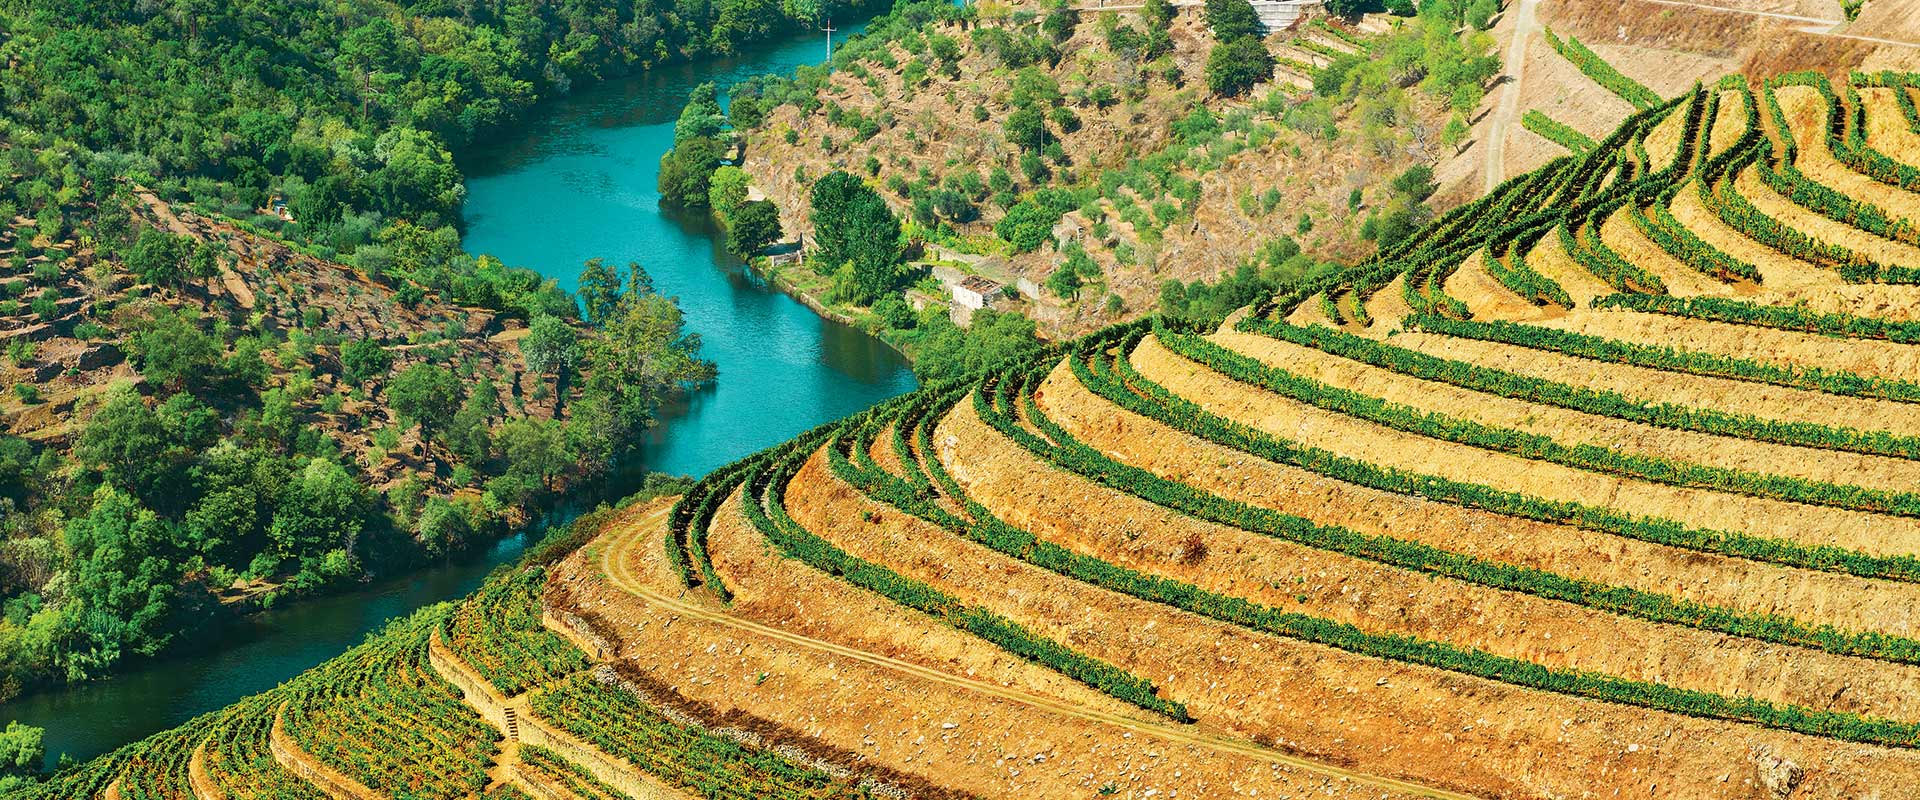 Rows of trees on sunlit hills with river in background, Portugal